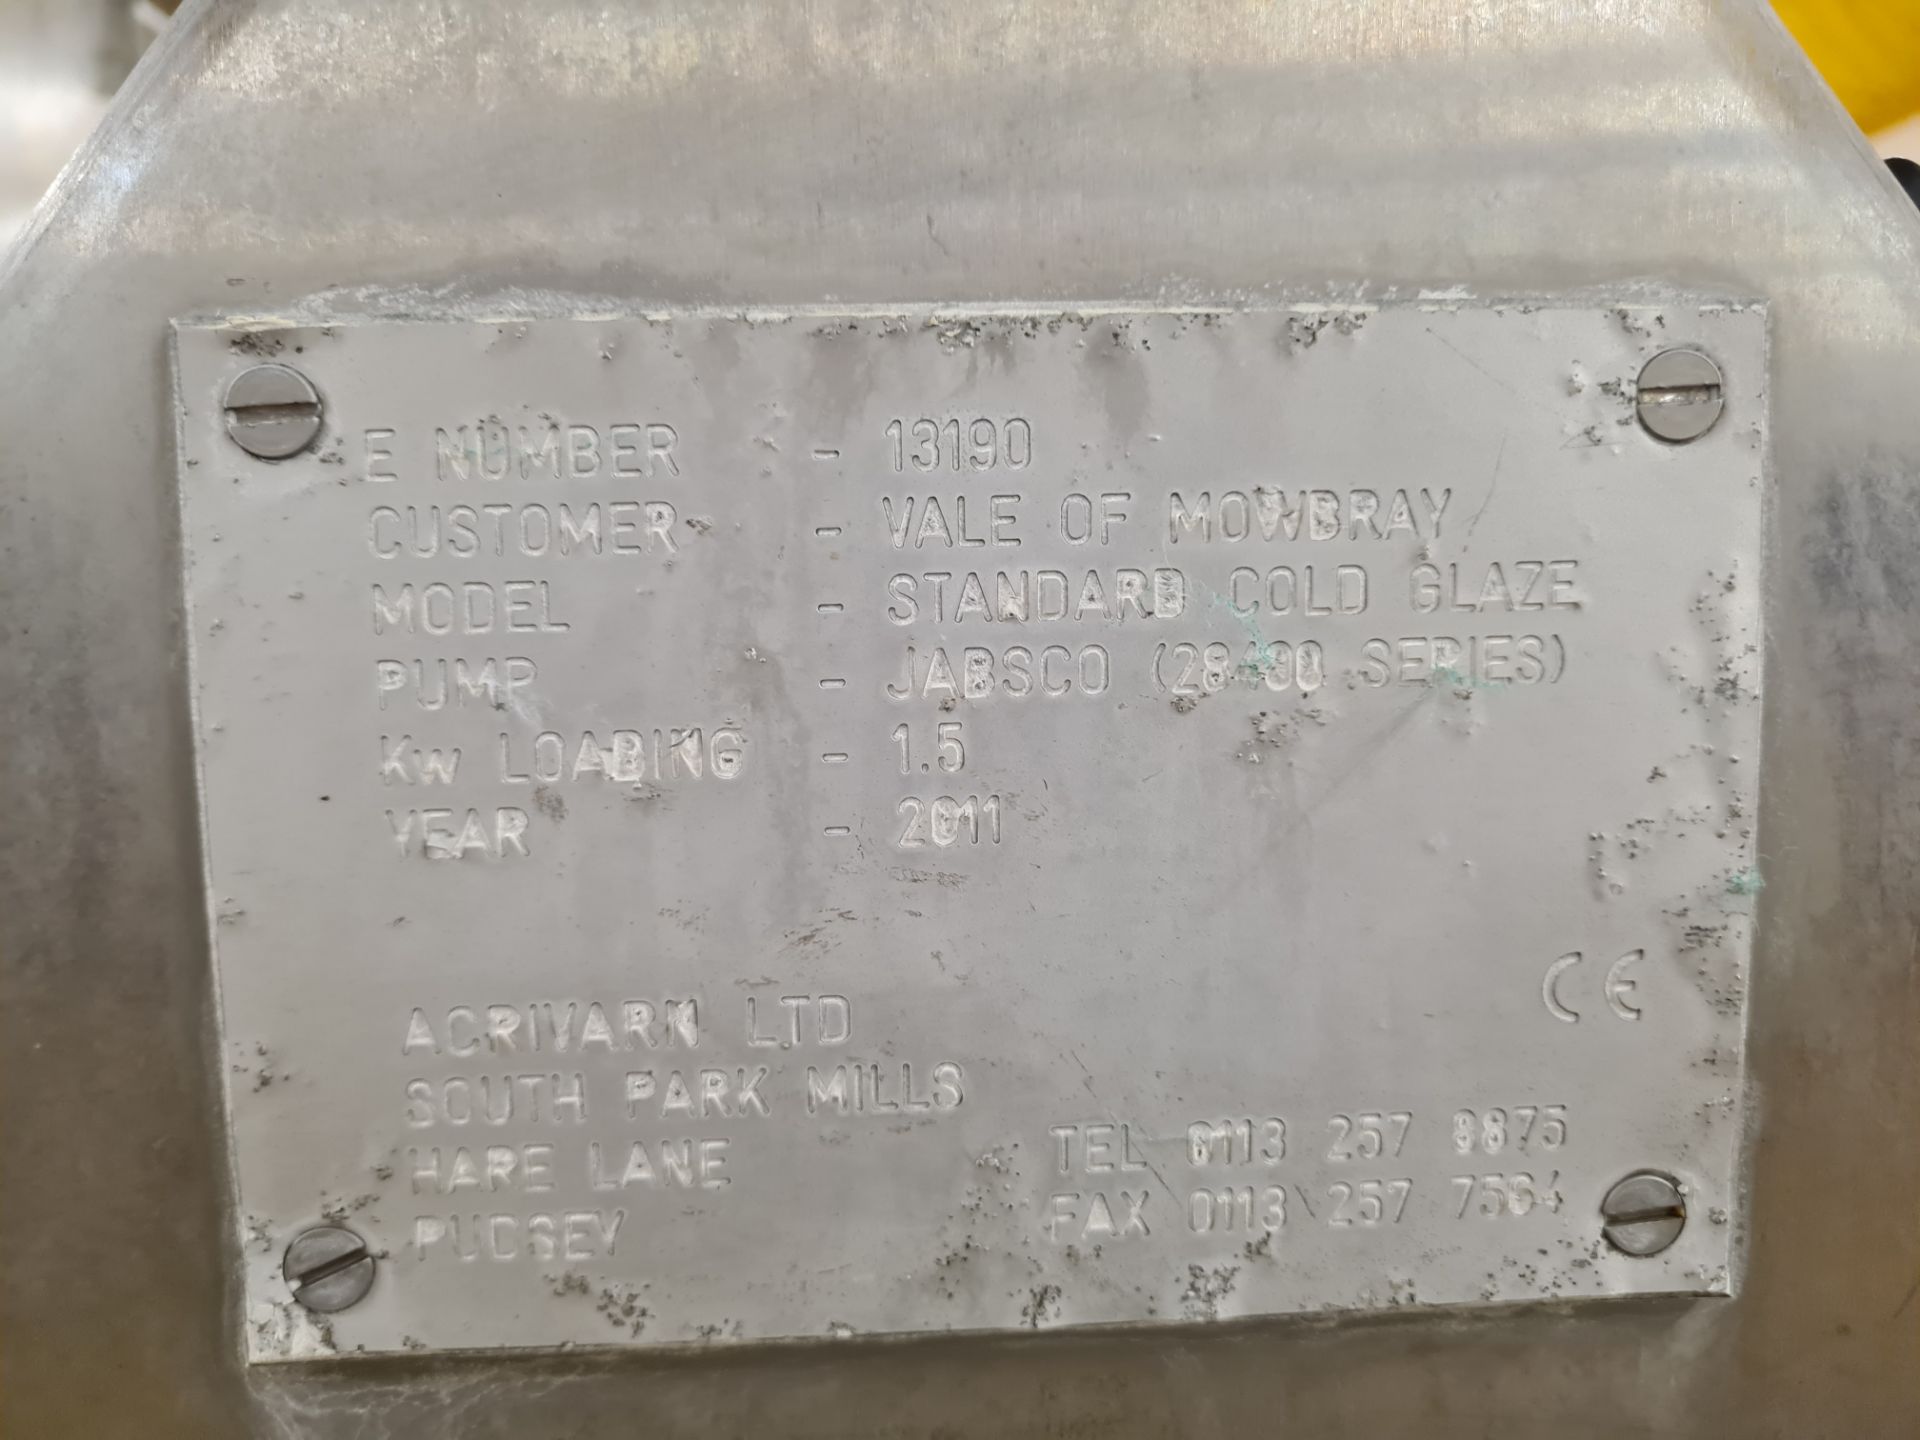 Acrivarn STAINLESS STEEL STANDARD COLD GLAZER, serial no. 13190, year of manufacture 2011Please read - Image 5 of 5